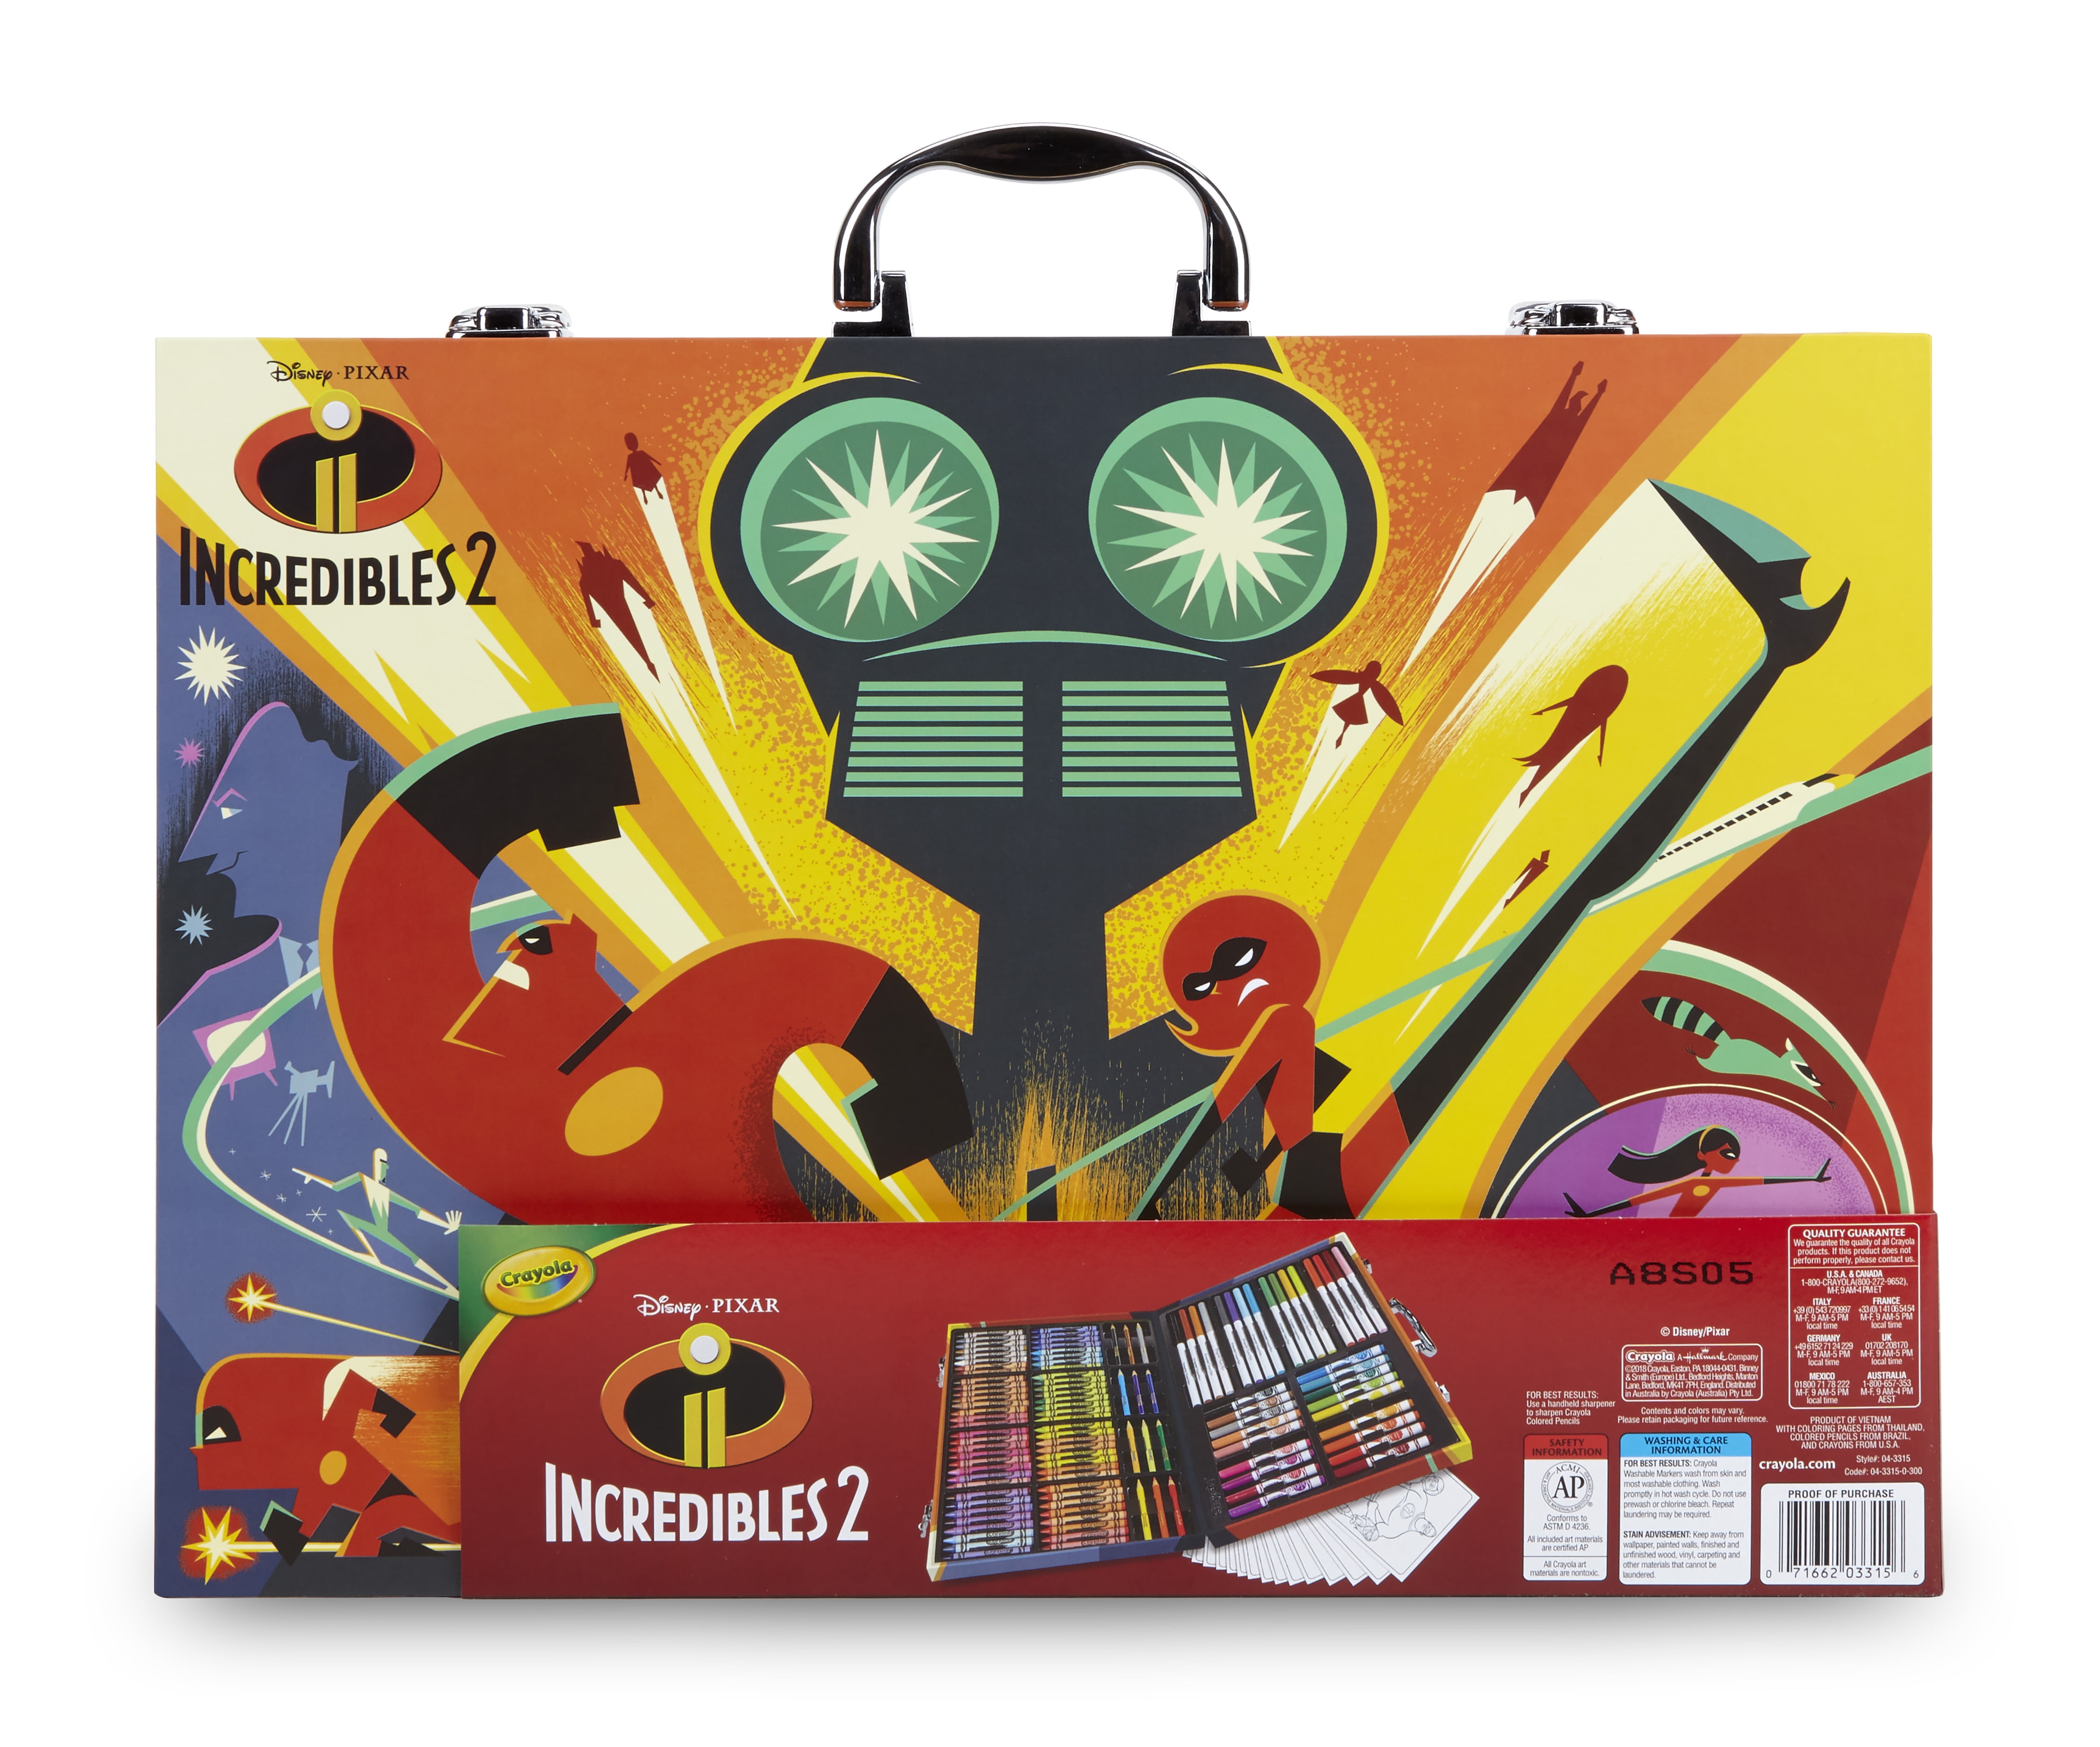 Crayola Inspiration Art Case, Incredibles 2, Gift for Kids Ages 6+ 